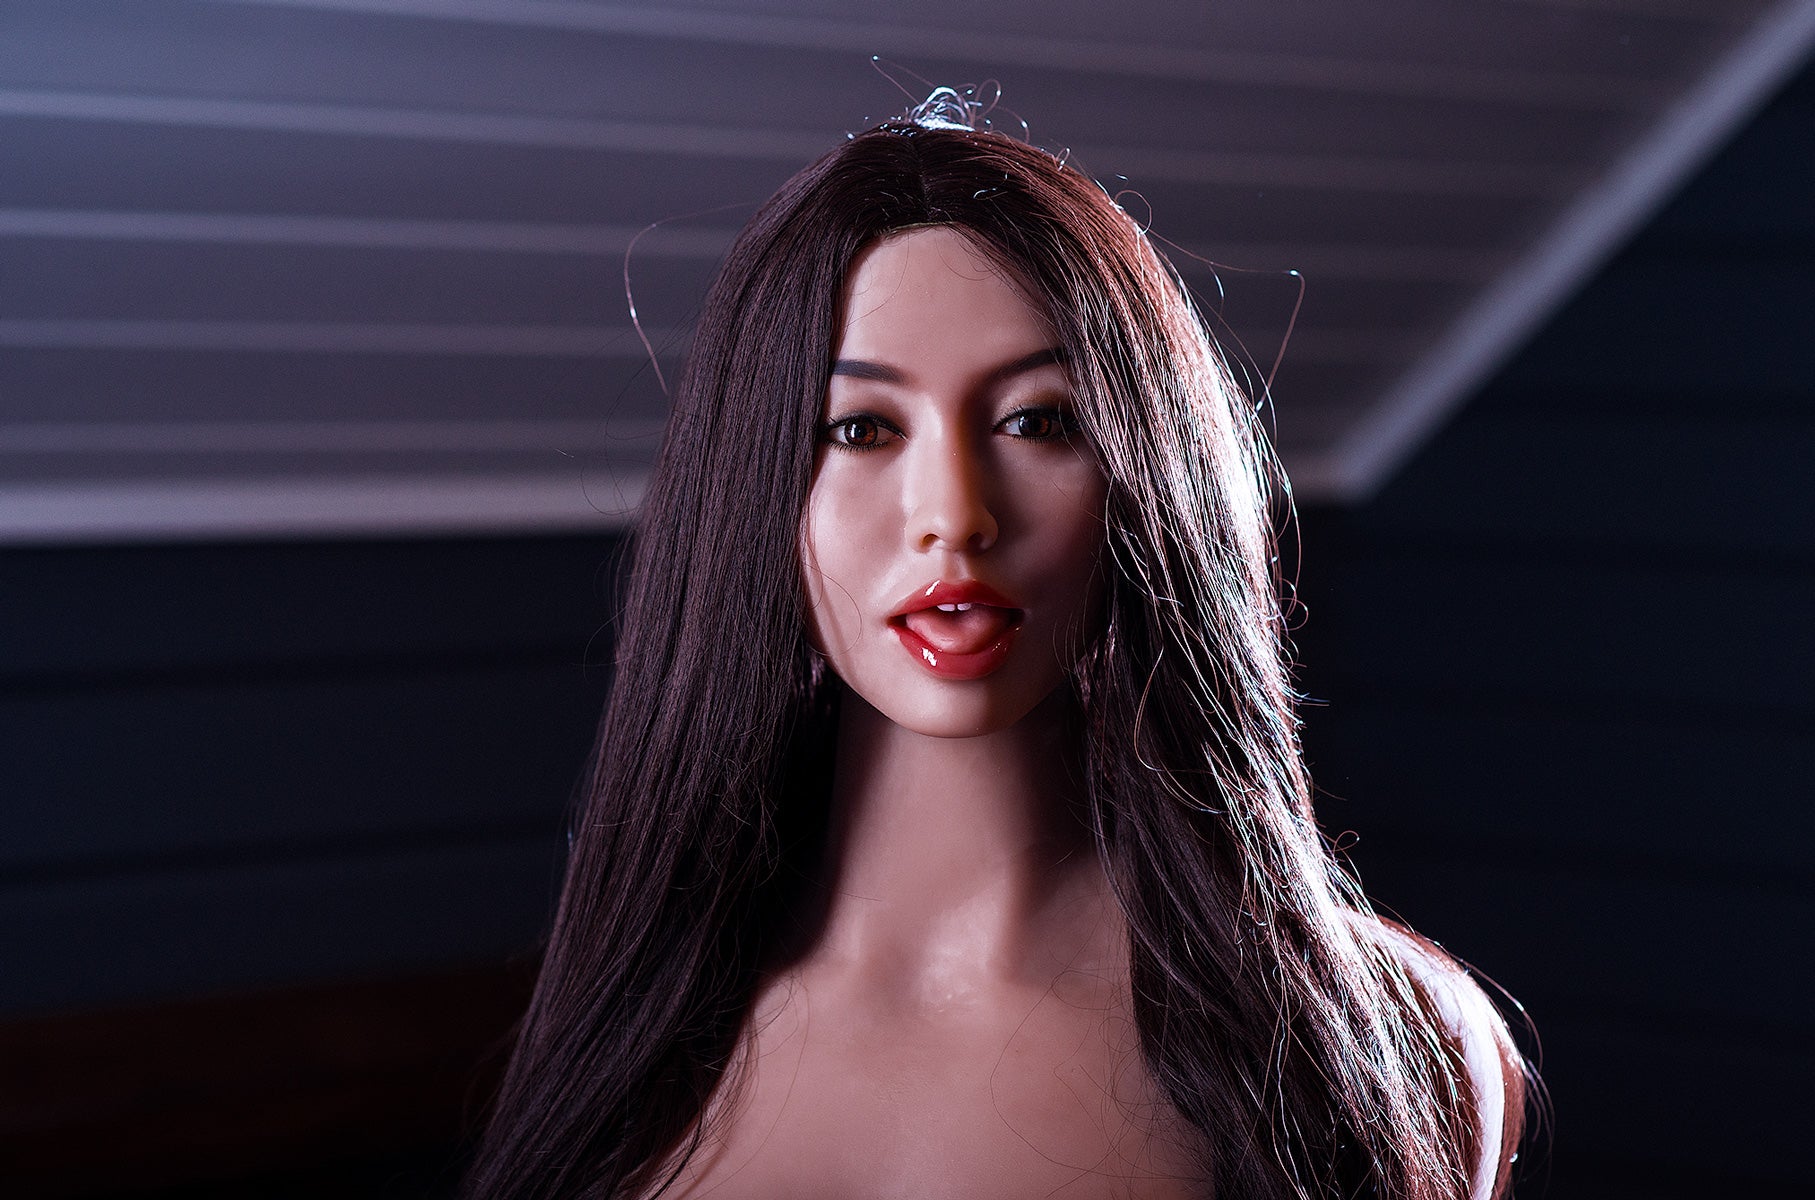 Kiki Cute Asian Sex Doll Premium Silicone And Tpa Life Size Realistic Luxury Sex Doll